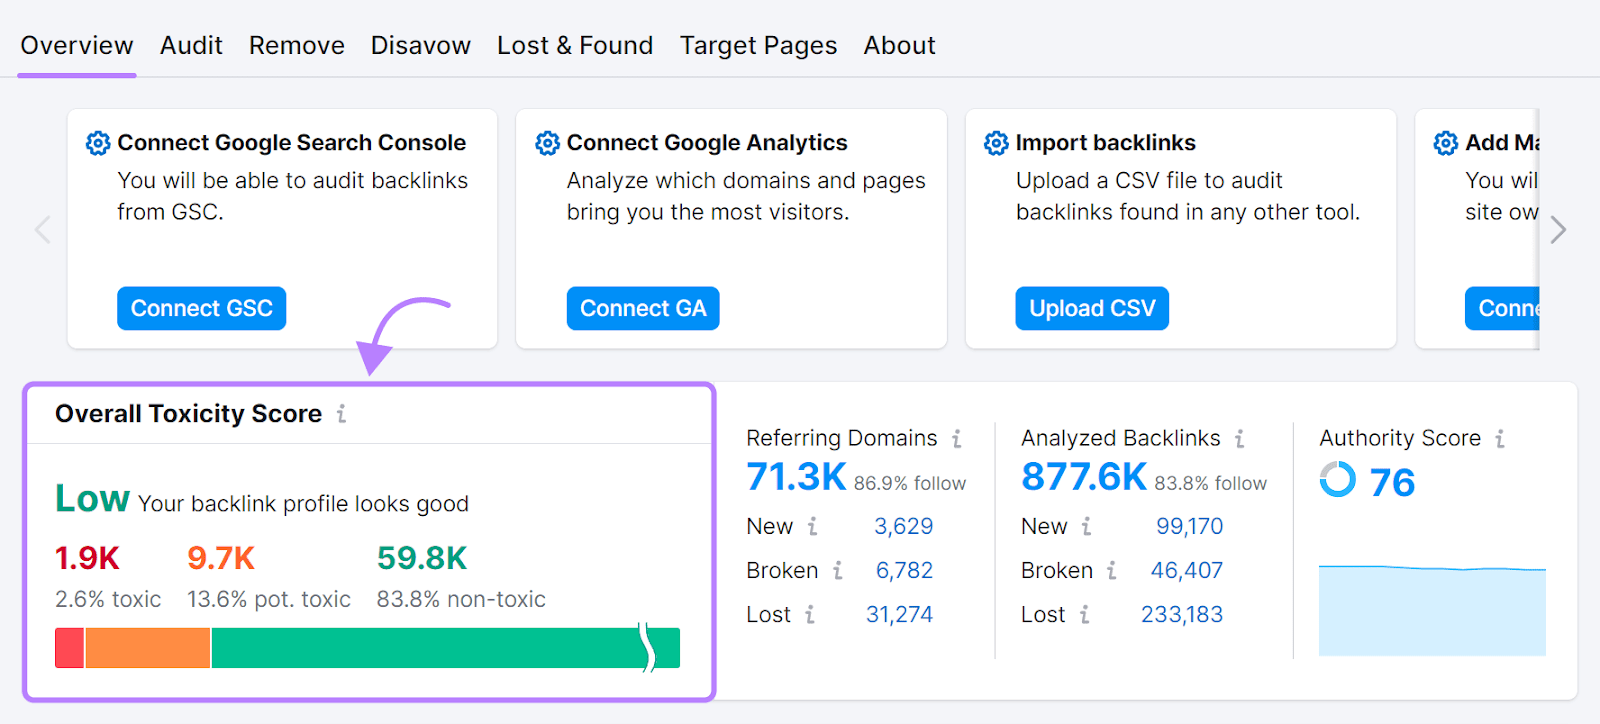 overall toxicity score metric shown in Backlink Audit's overview report